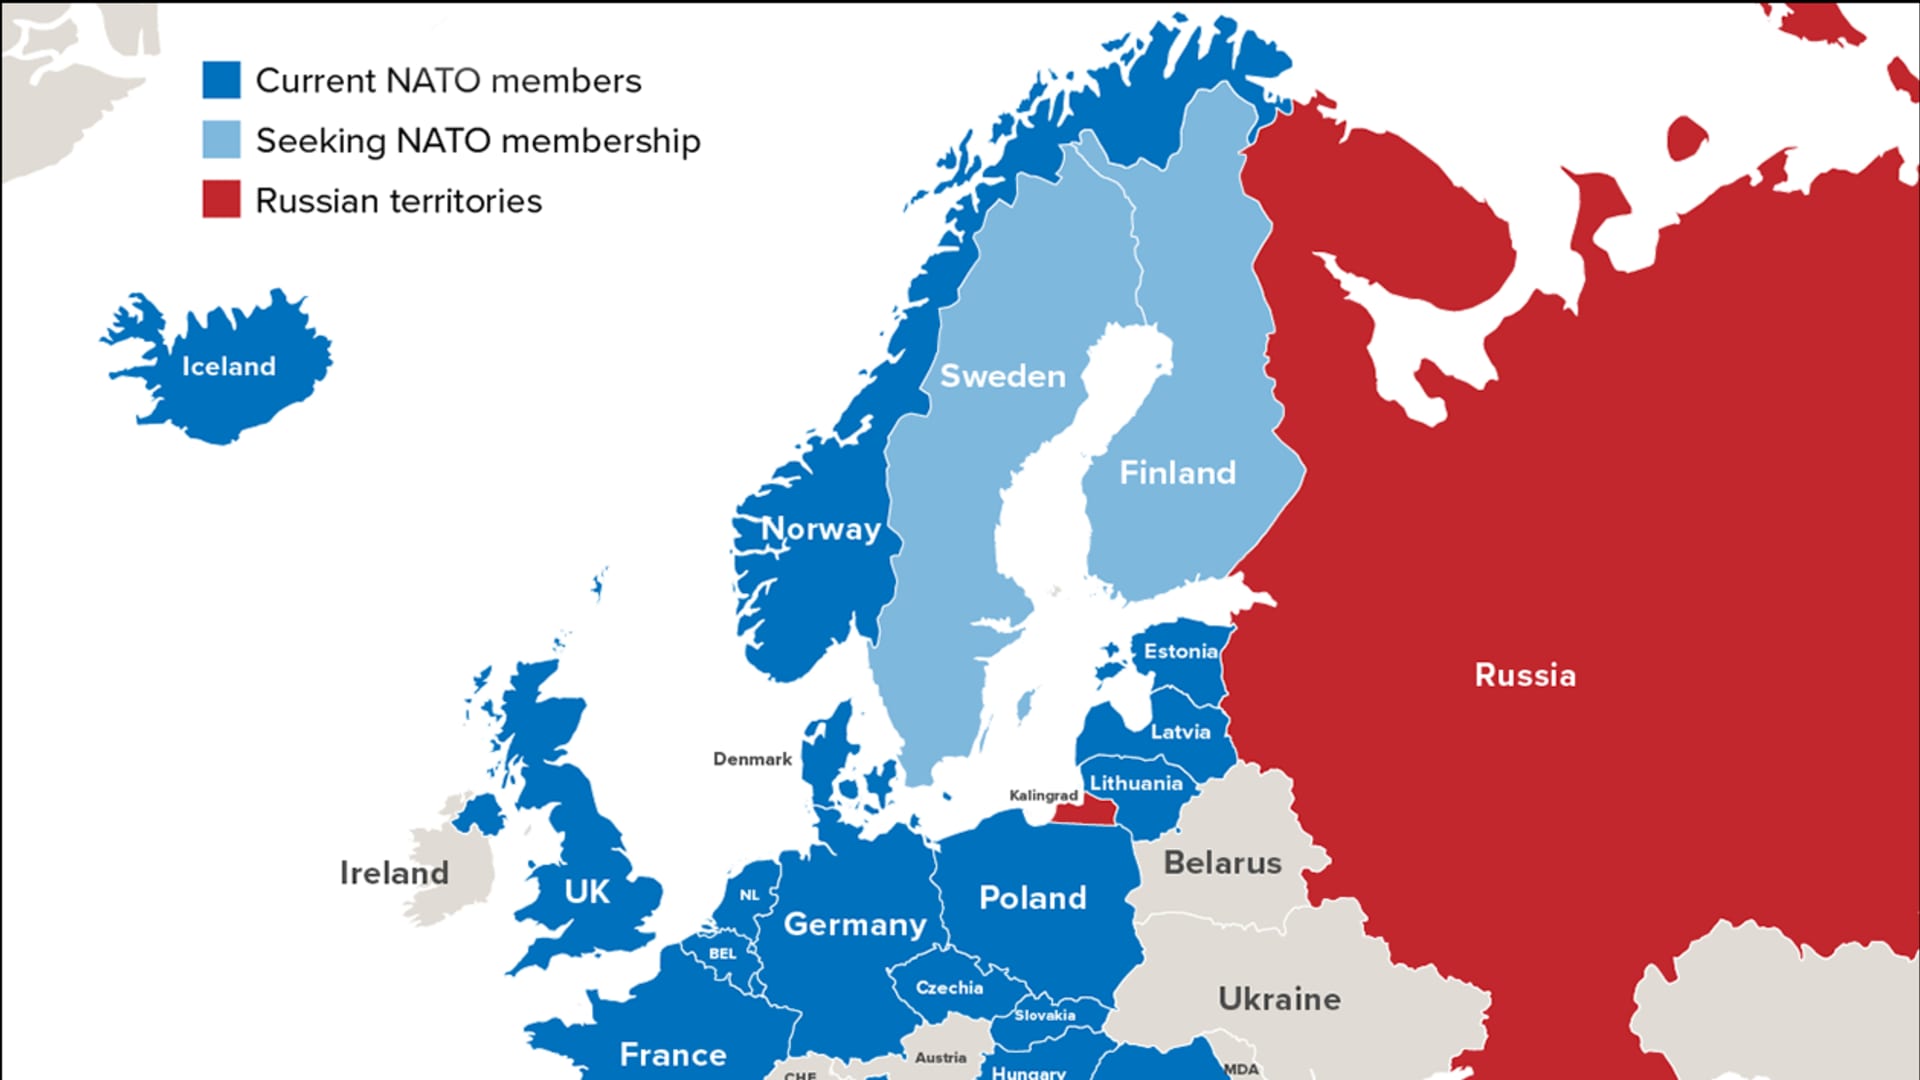 As of 2022, NATO has expanded to let in three former Soviet states and all of the former Warsaw Pact countries.